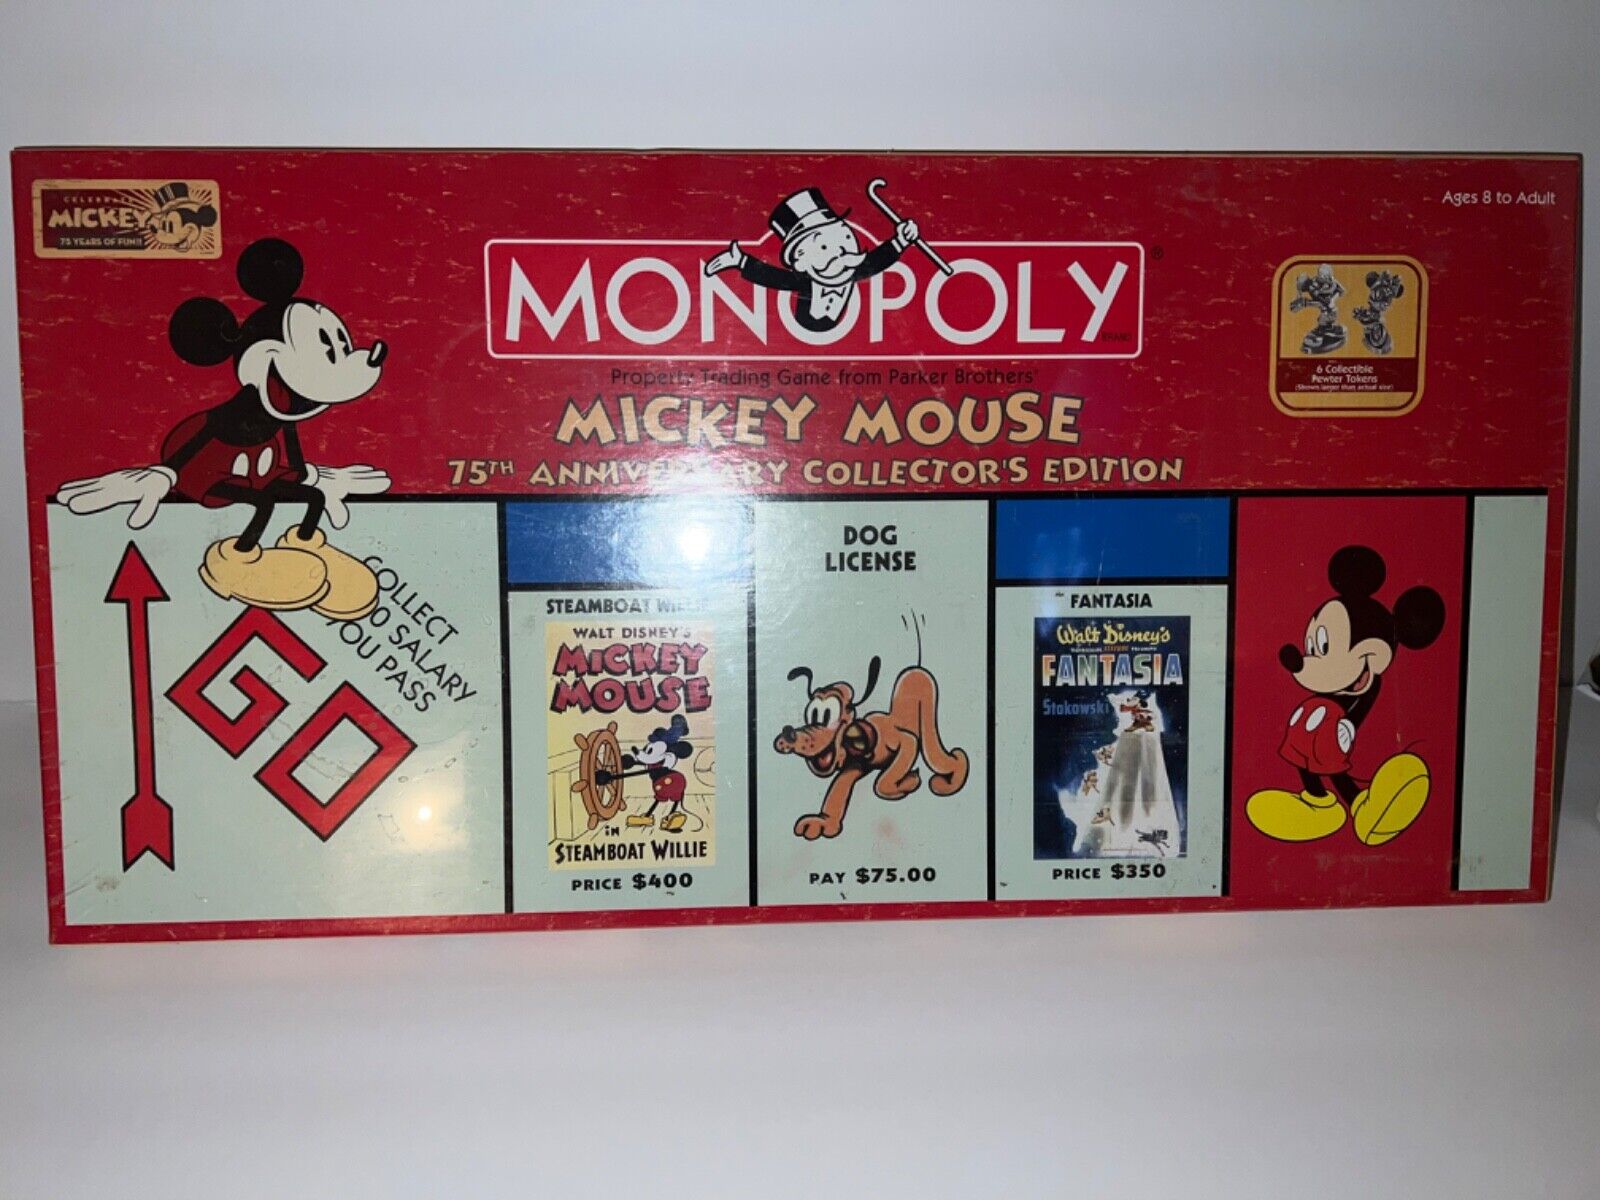 mickey mouse 75th anniversary collectors edition monopoly (SEALED) never opened